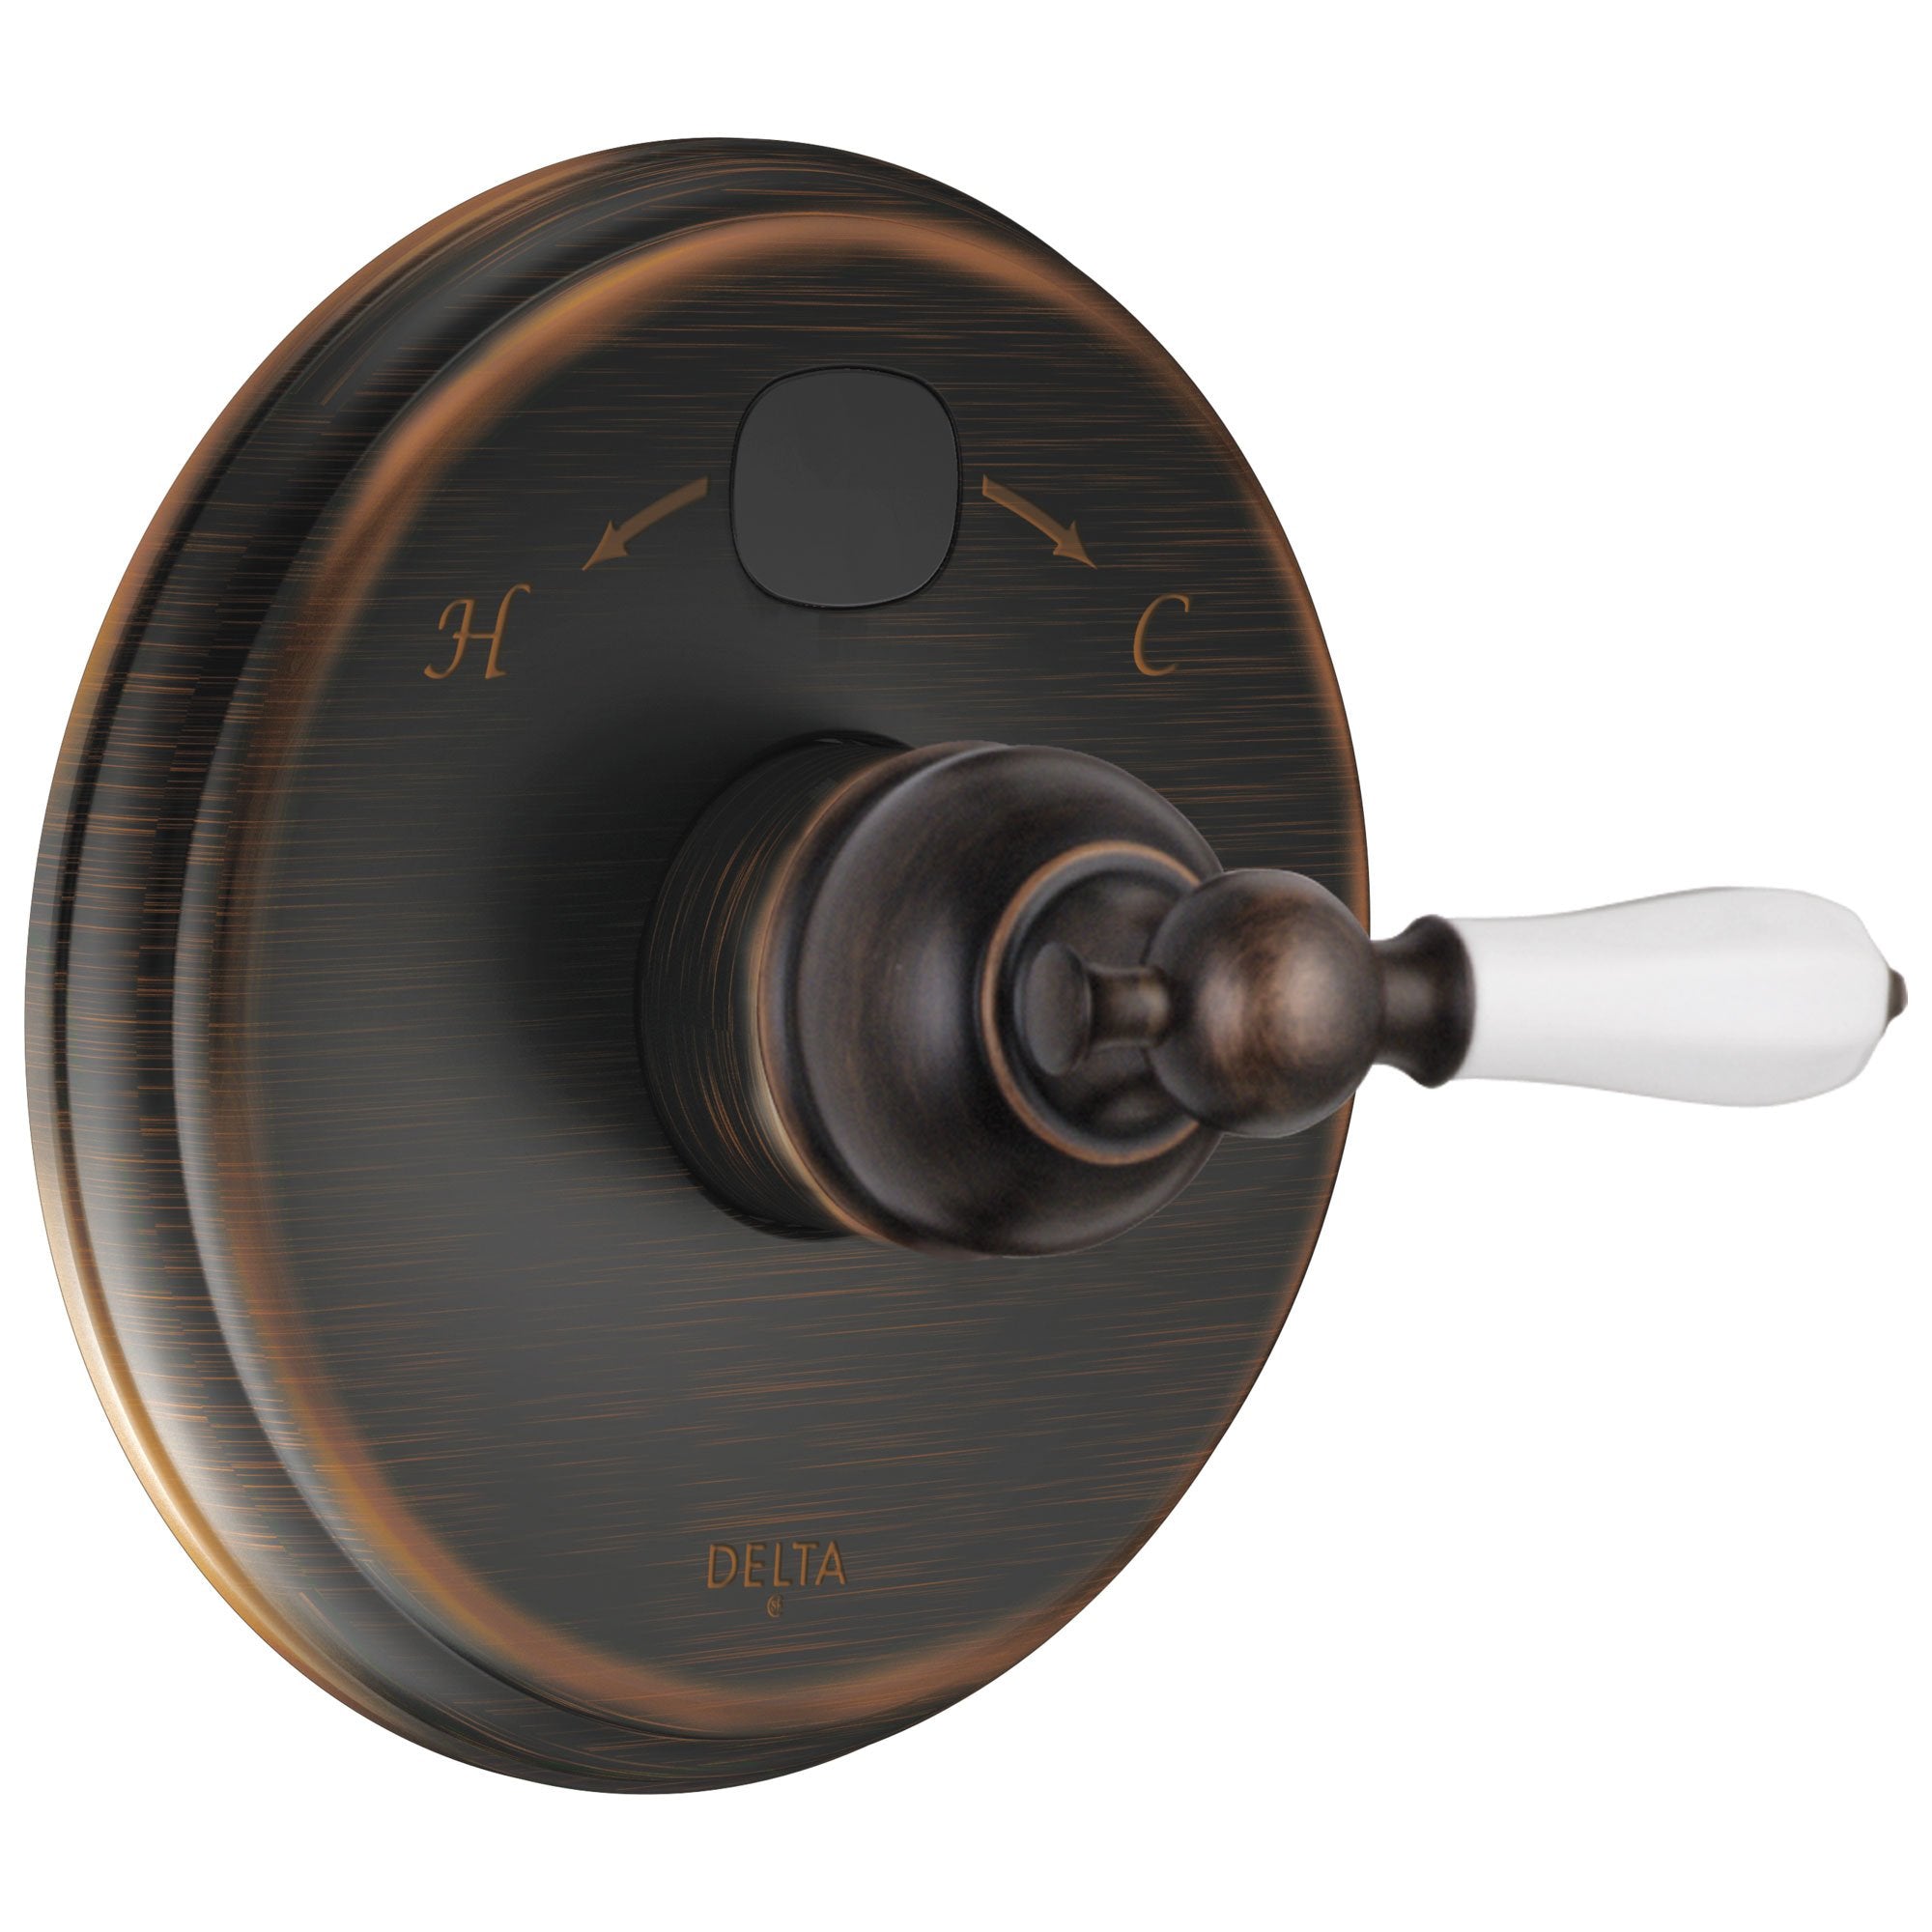 Delta Venetian Bronze Victorian 14 Series Digital Display Temp2O Shower Valve Control COMPLETE with Single White Lever Handle and Valve with Stops D1674V